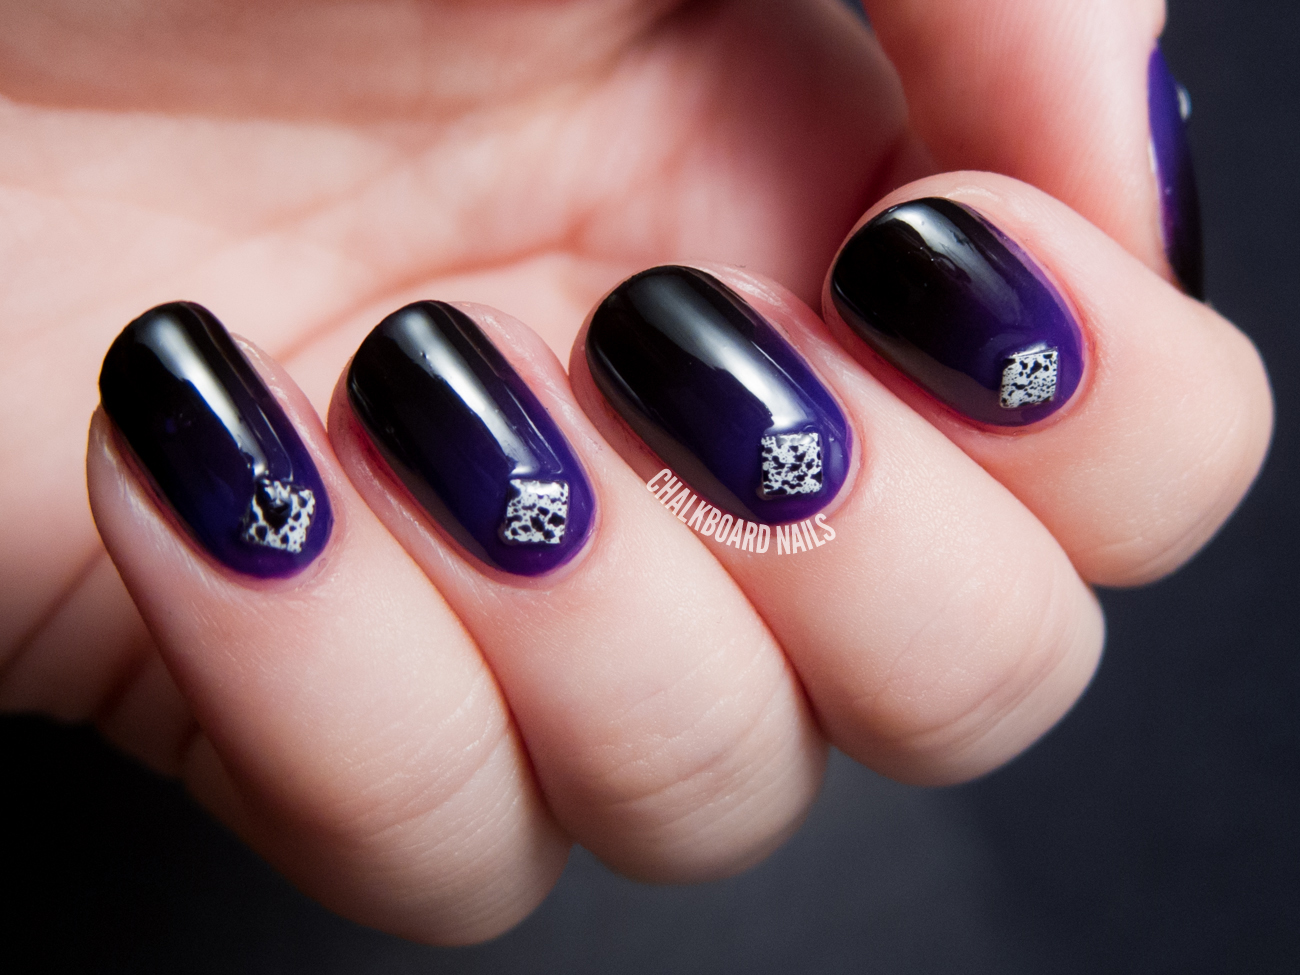 Dark and Moody Nails on Tumblr - wide 5